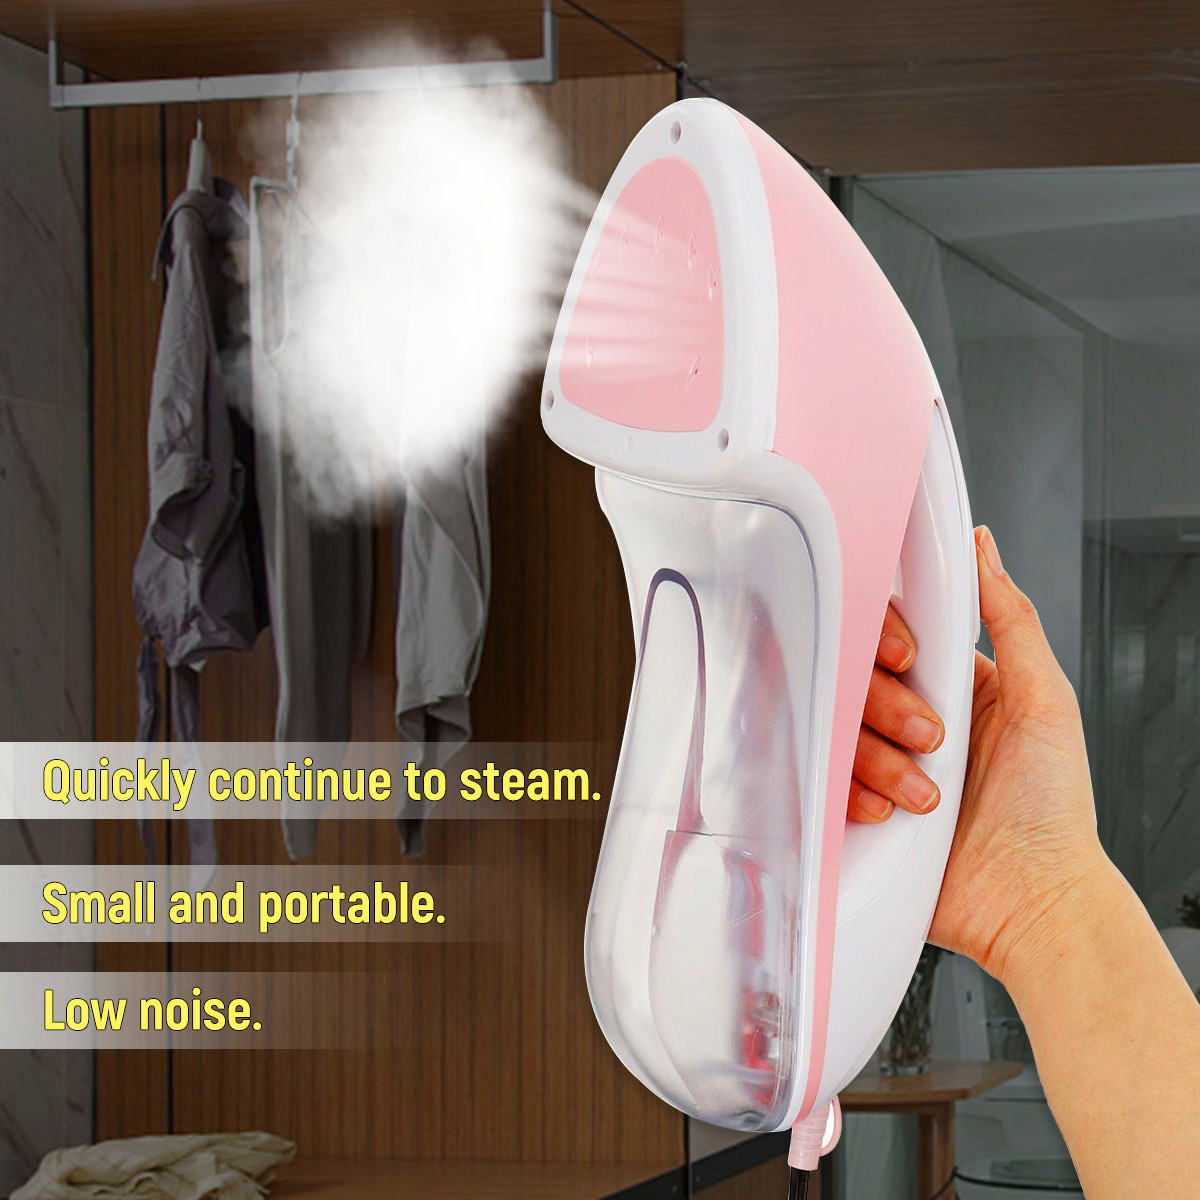 110V-1000W-Handheld-Electric-Steam-Iron-Fabric-Clothes-Garment-Steamer-Dry-Flat-1500430-3